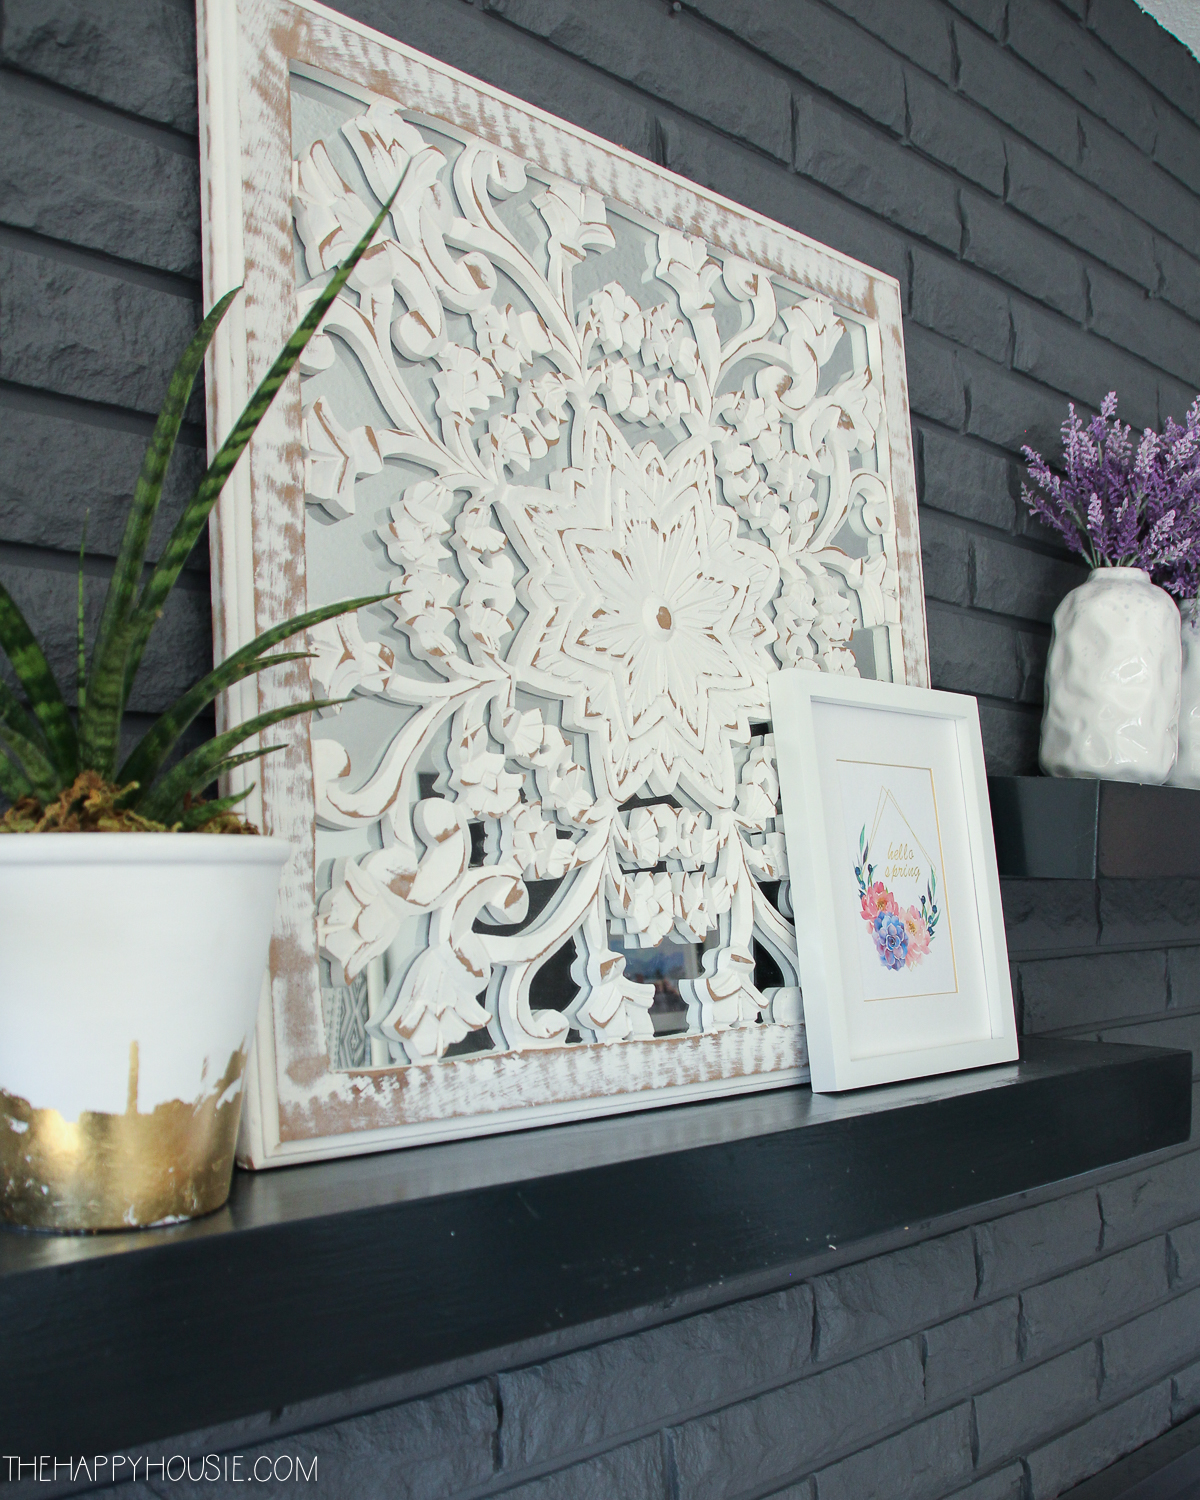 Fireplace shelves decorated with pictures, a plant and flowers in white vases.